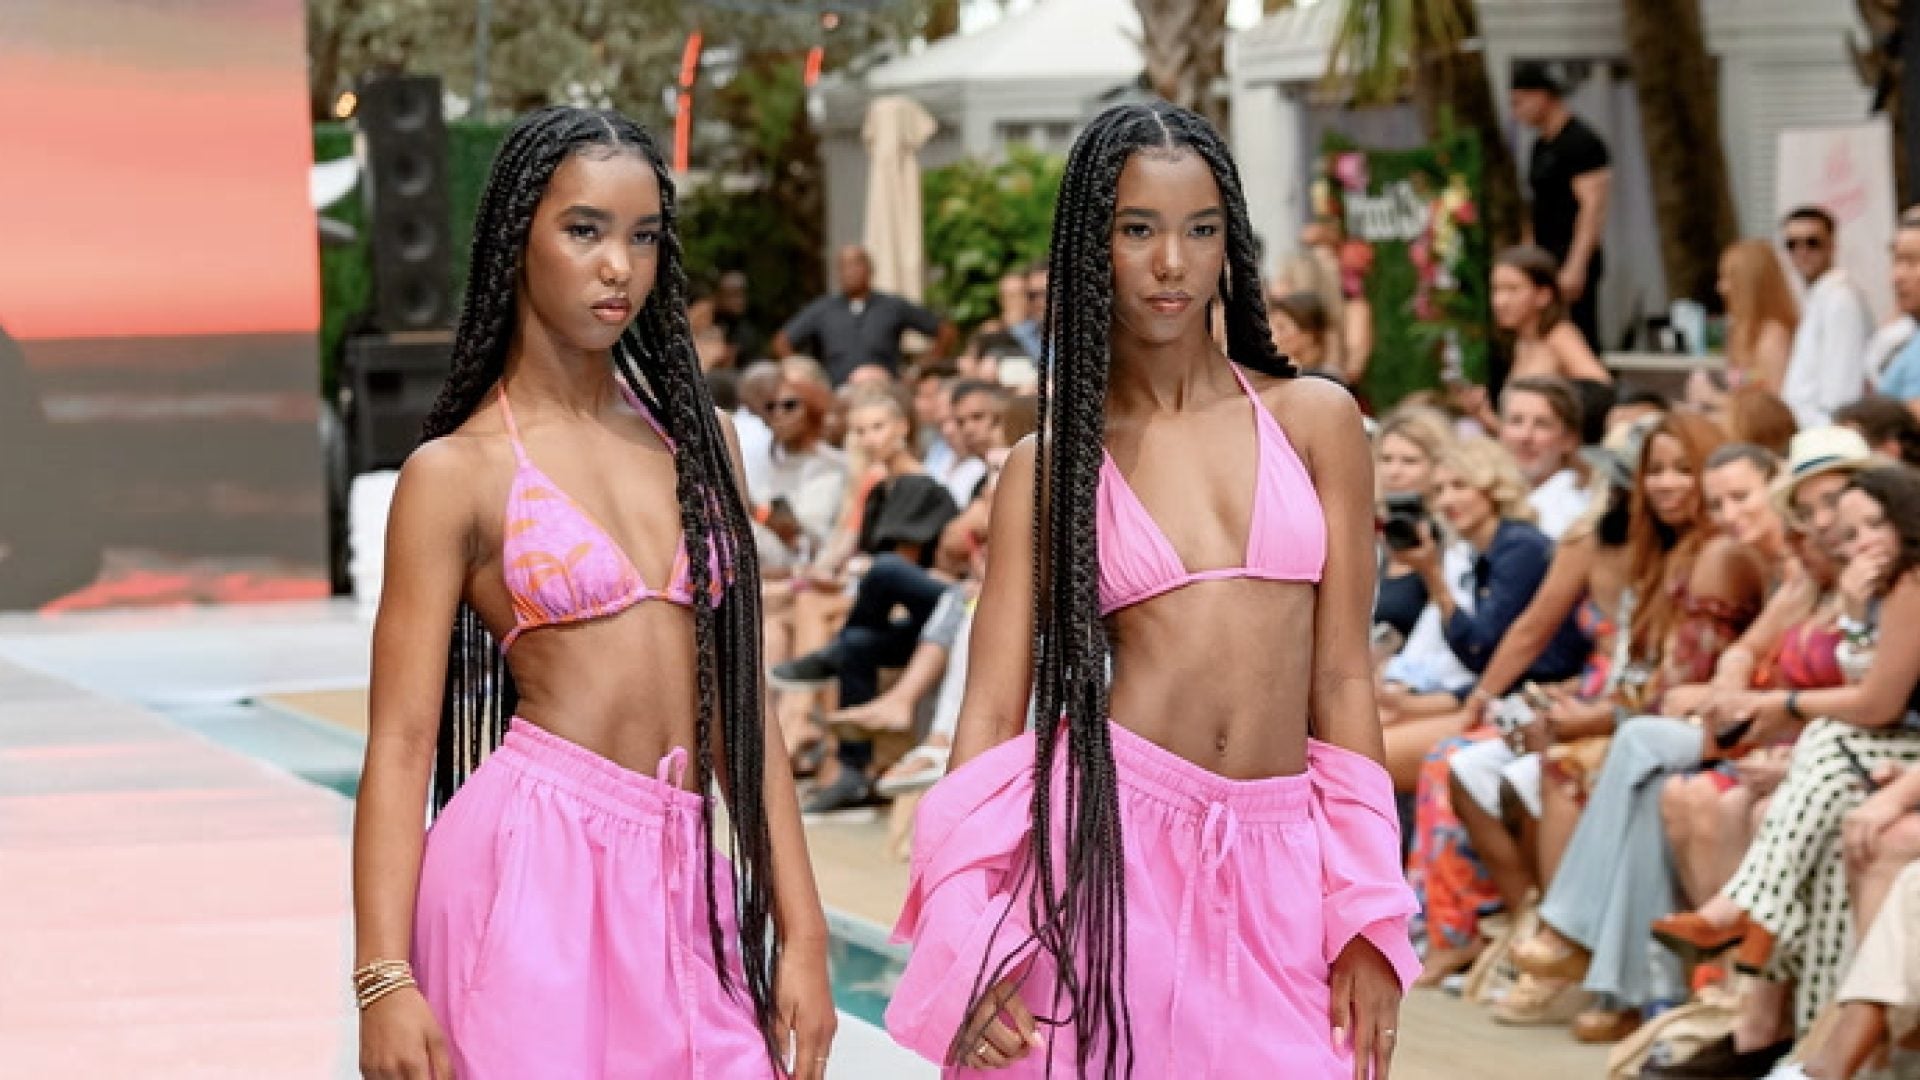 WATCH: In My Feed – The Combs Twins Are Runway Ready for Miami Swim Week